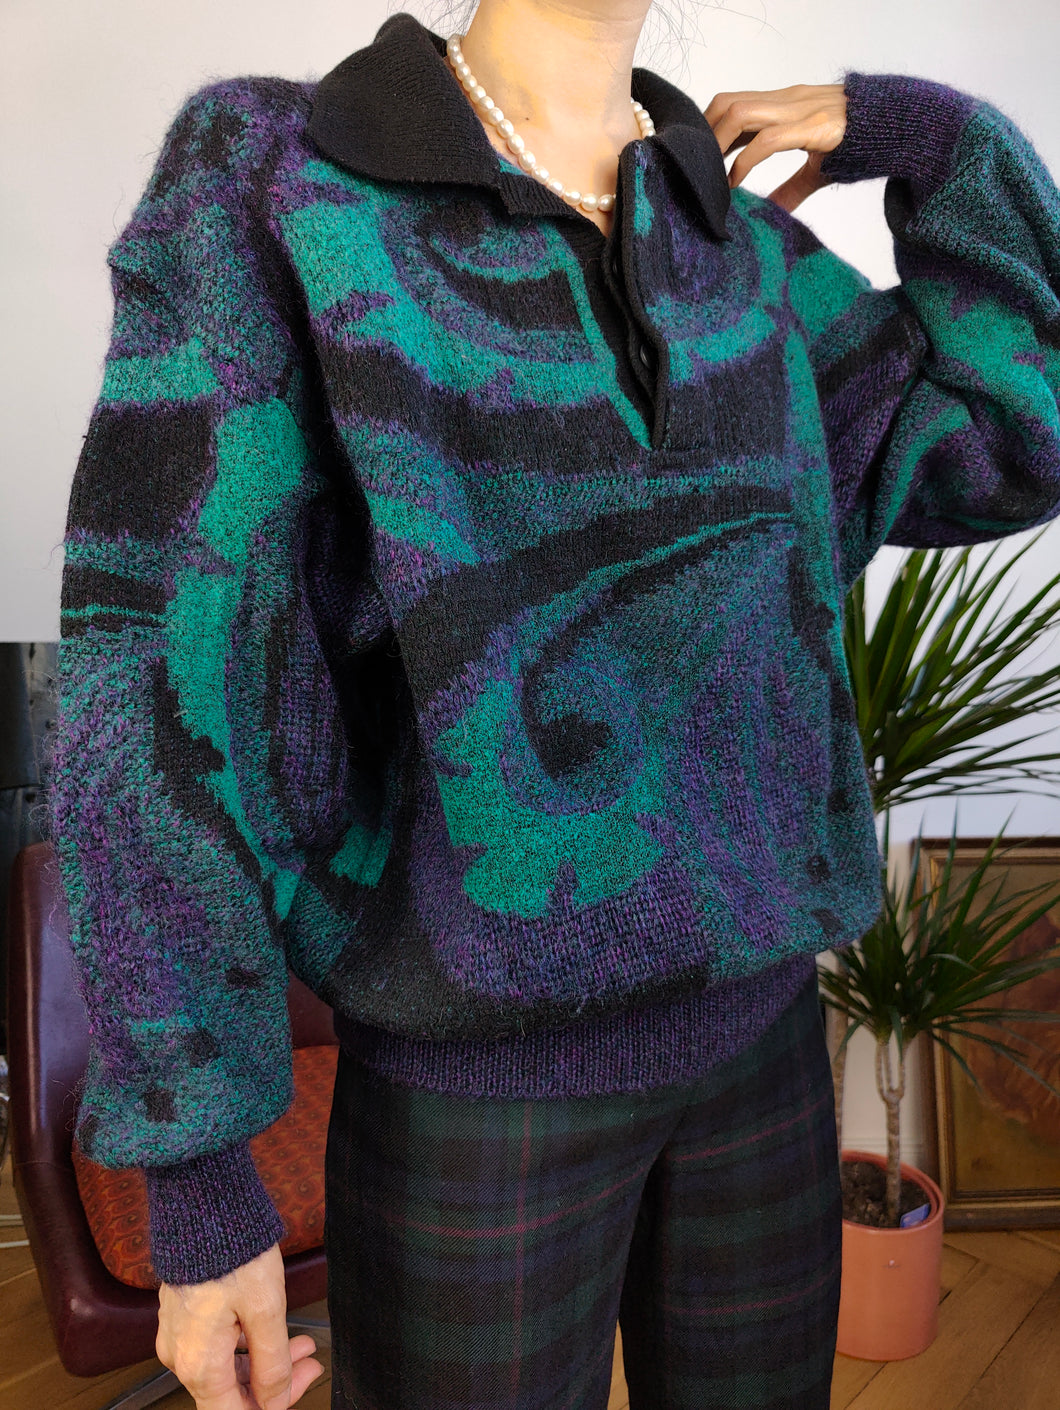 Vintage wool mix knit sweater purple green black crazy pattern fall winter knitted pullover jumper polo collar Italy S-M